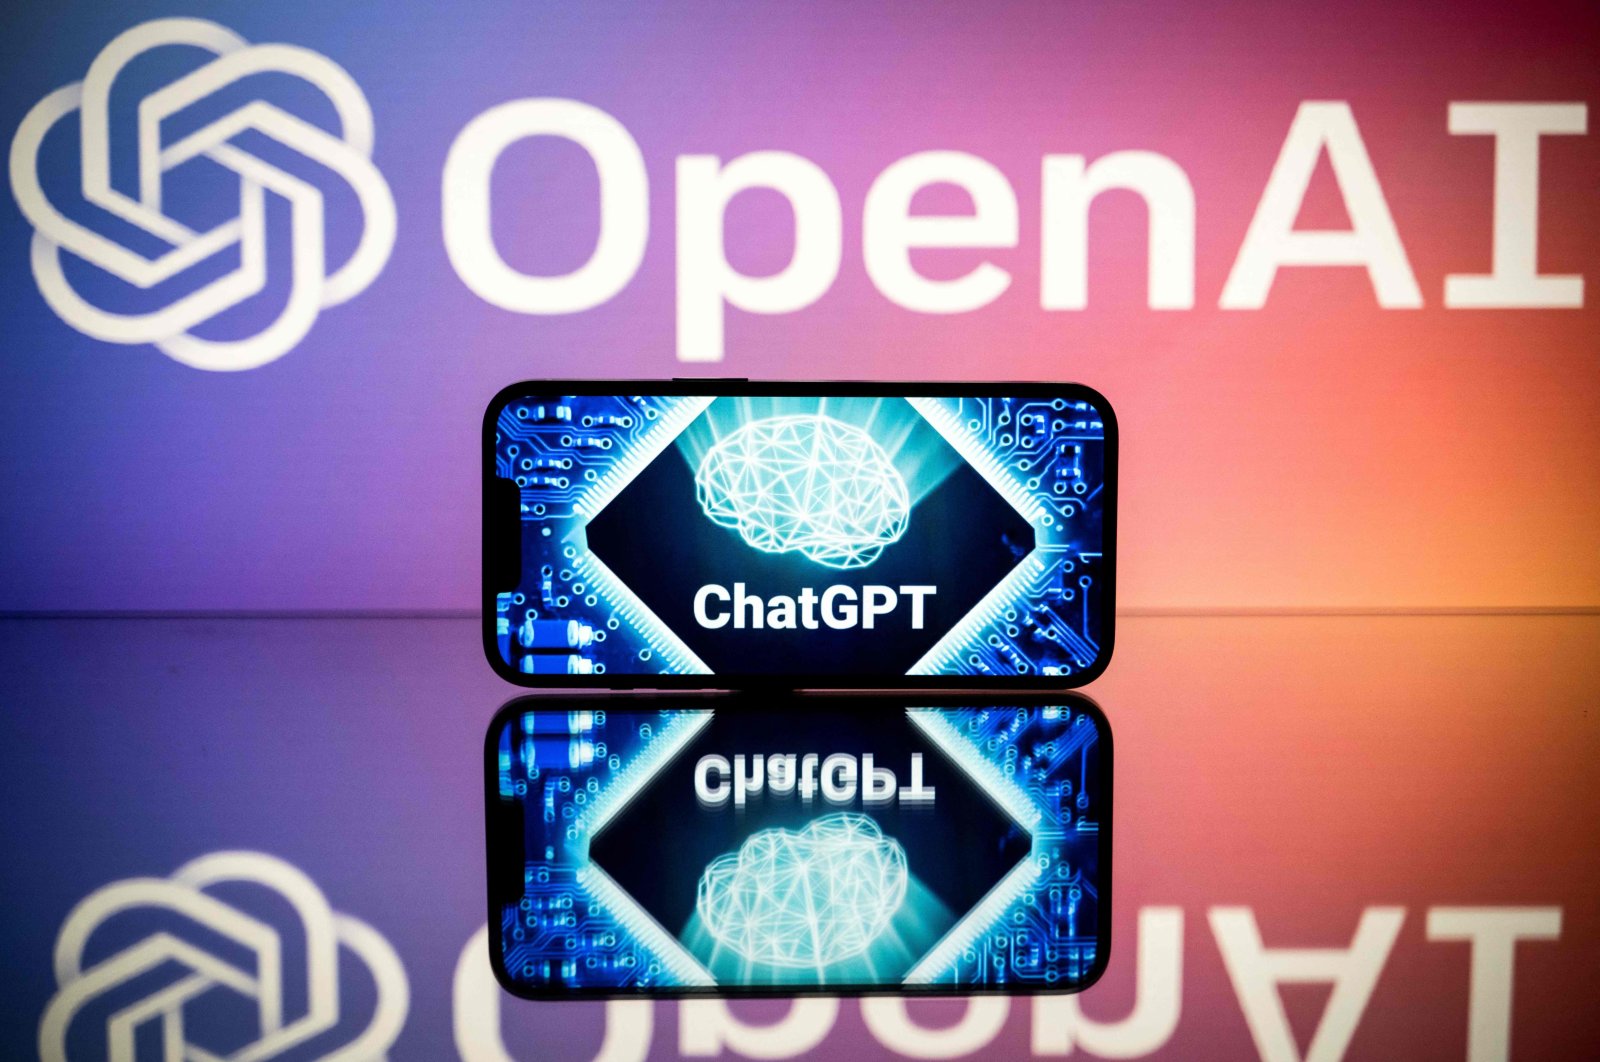 Screens displaying the logos of OpenAI and ChatGPT are seen in Toulouse, southwestern France, Jan. 23, 2023. (AFP Photo)